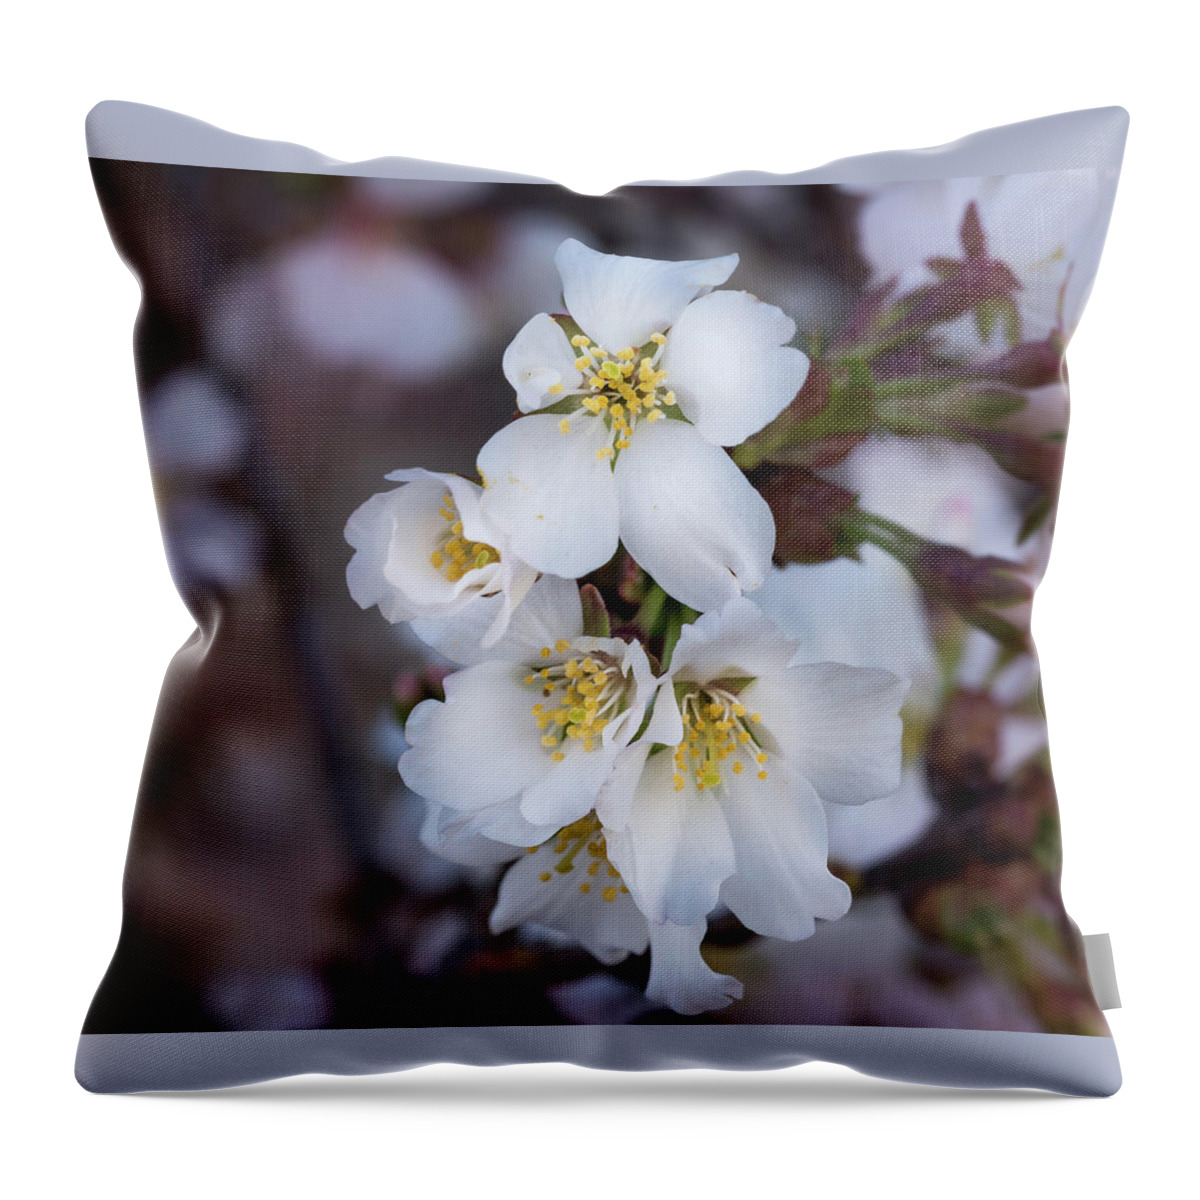 Japanese Throw Pillow featuring the photograph Japanese Cherry Blooms by Cynthia Wolfe